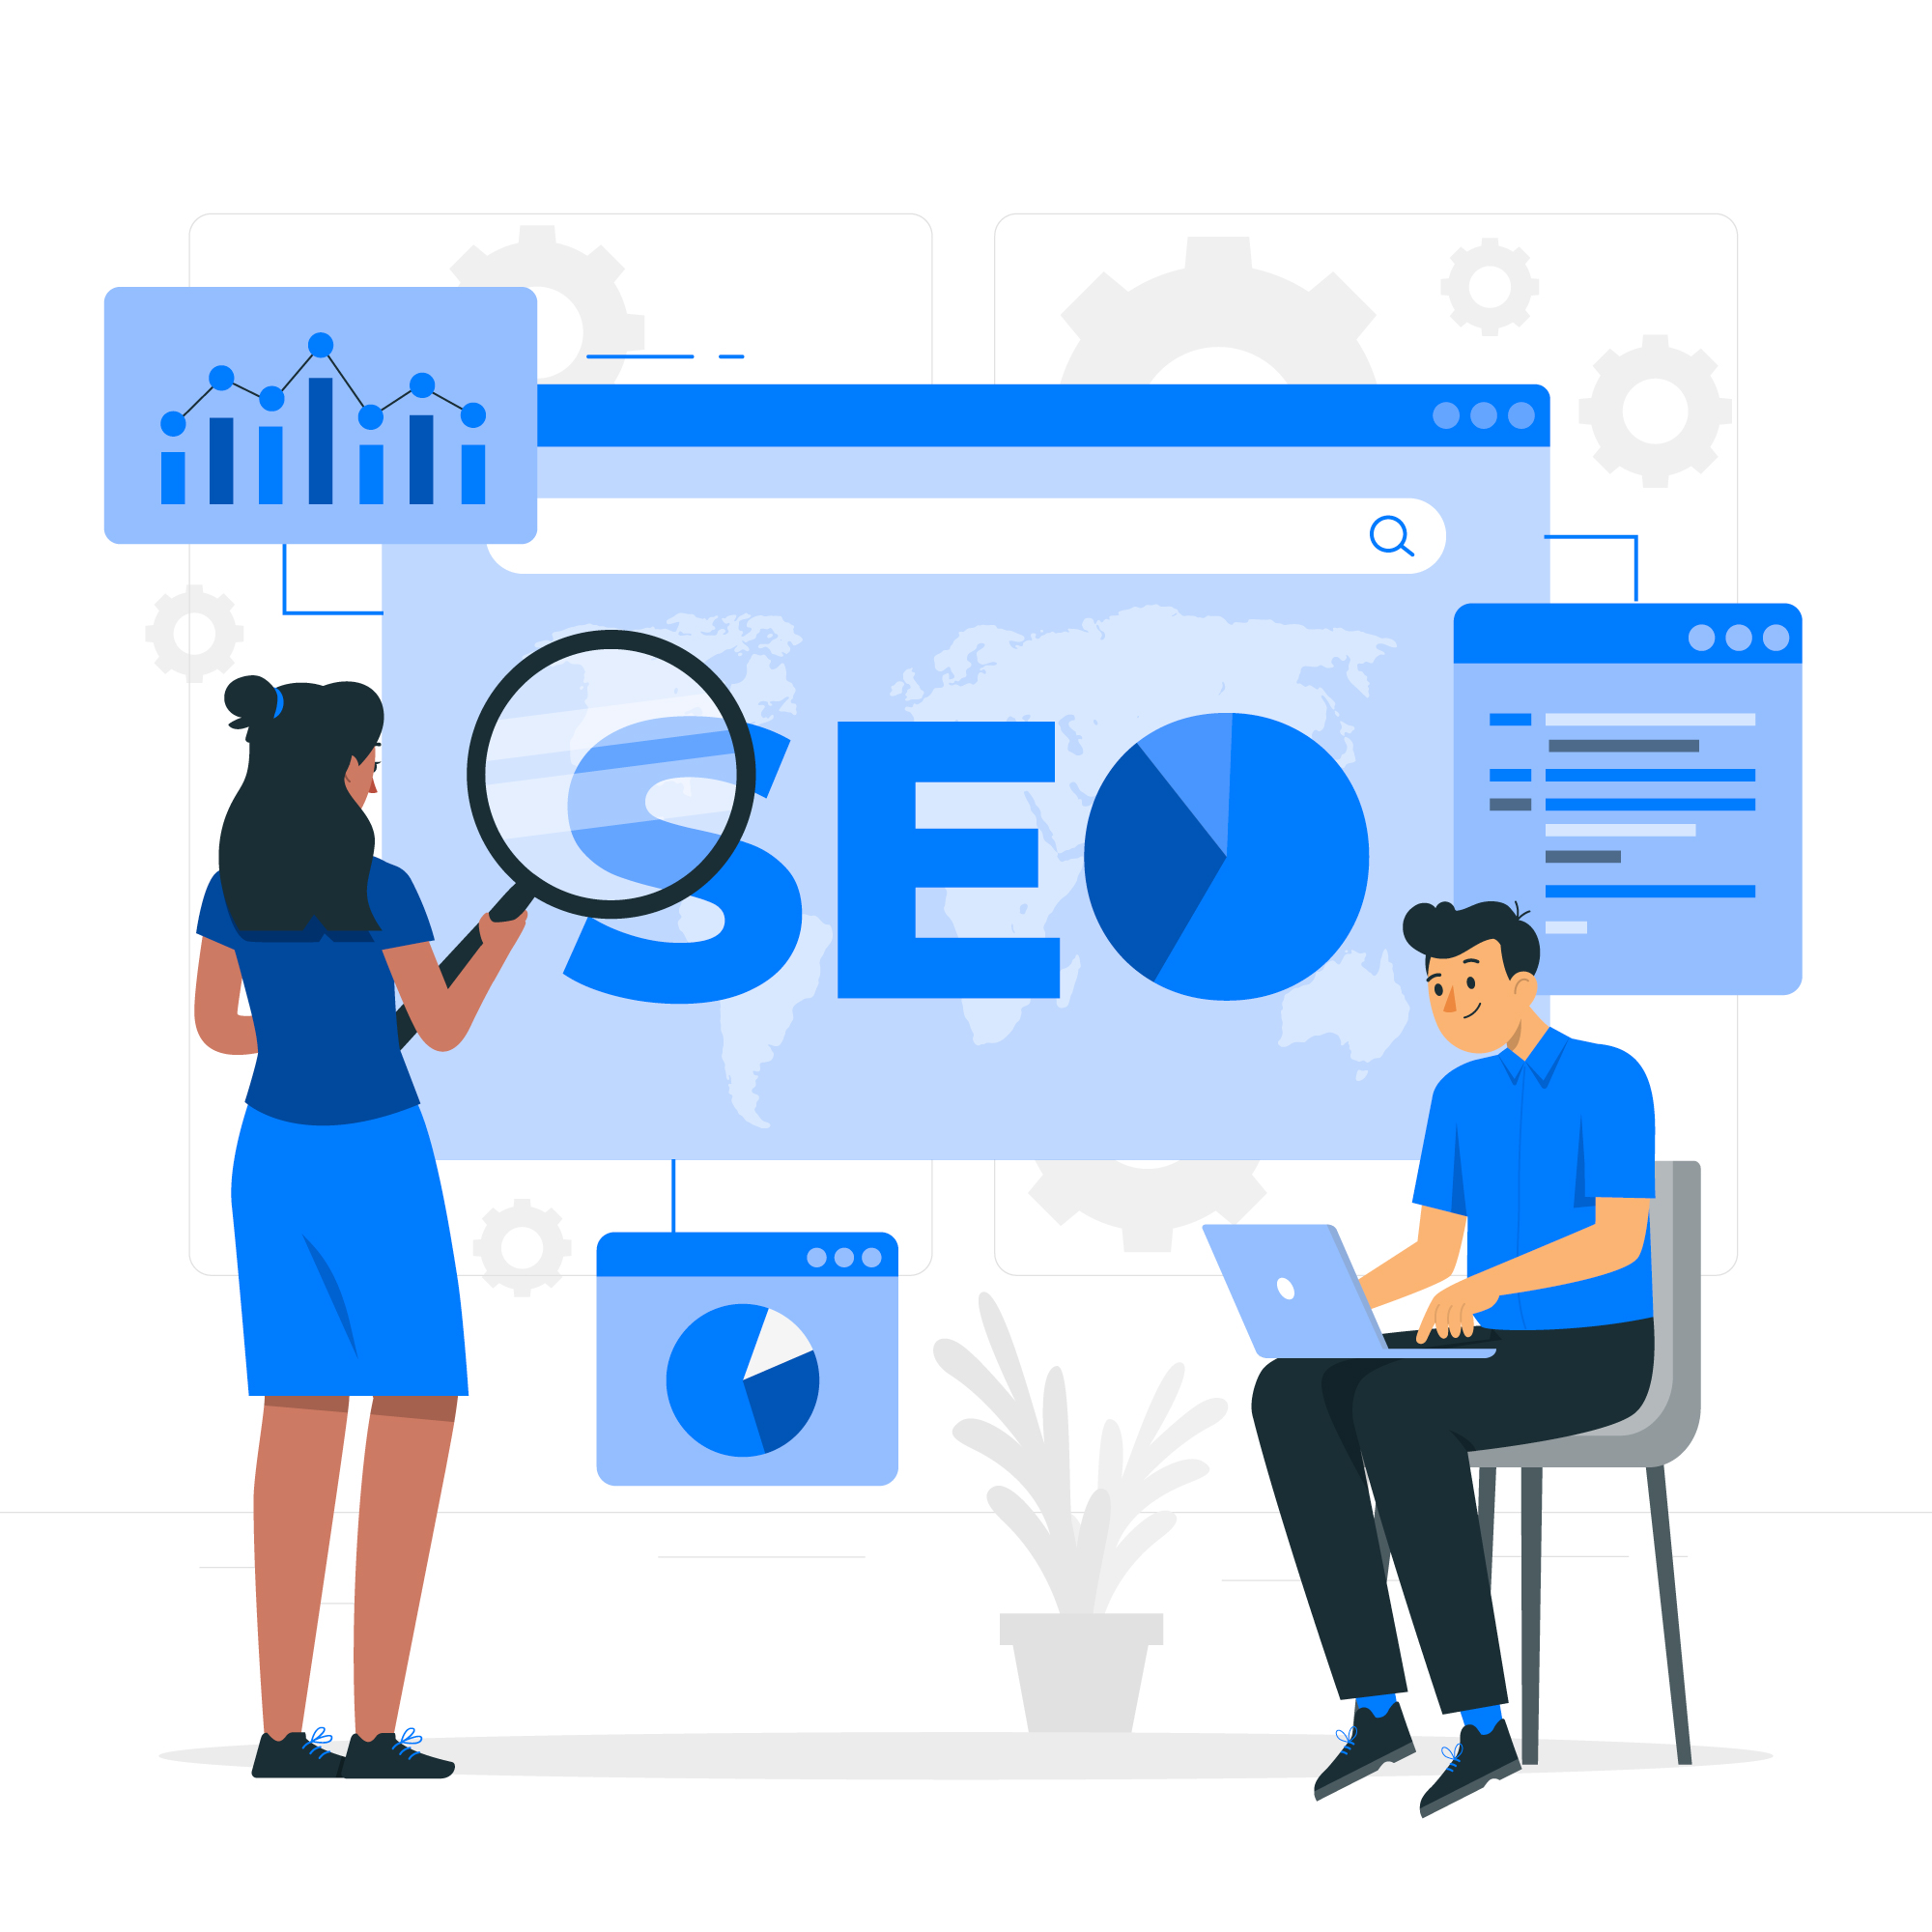 SEO Services in Lahore